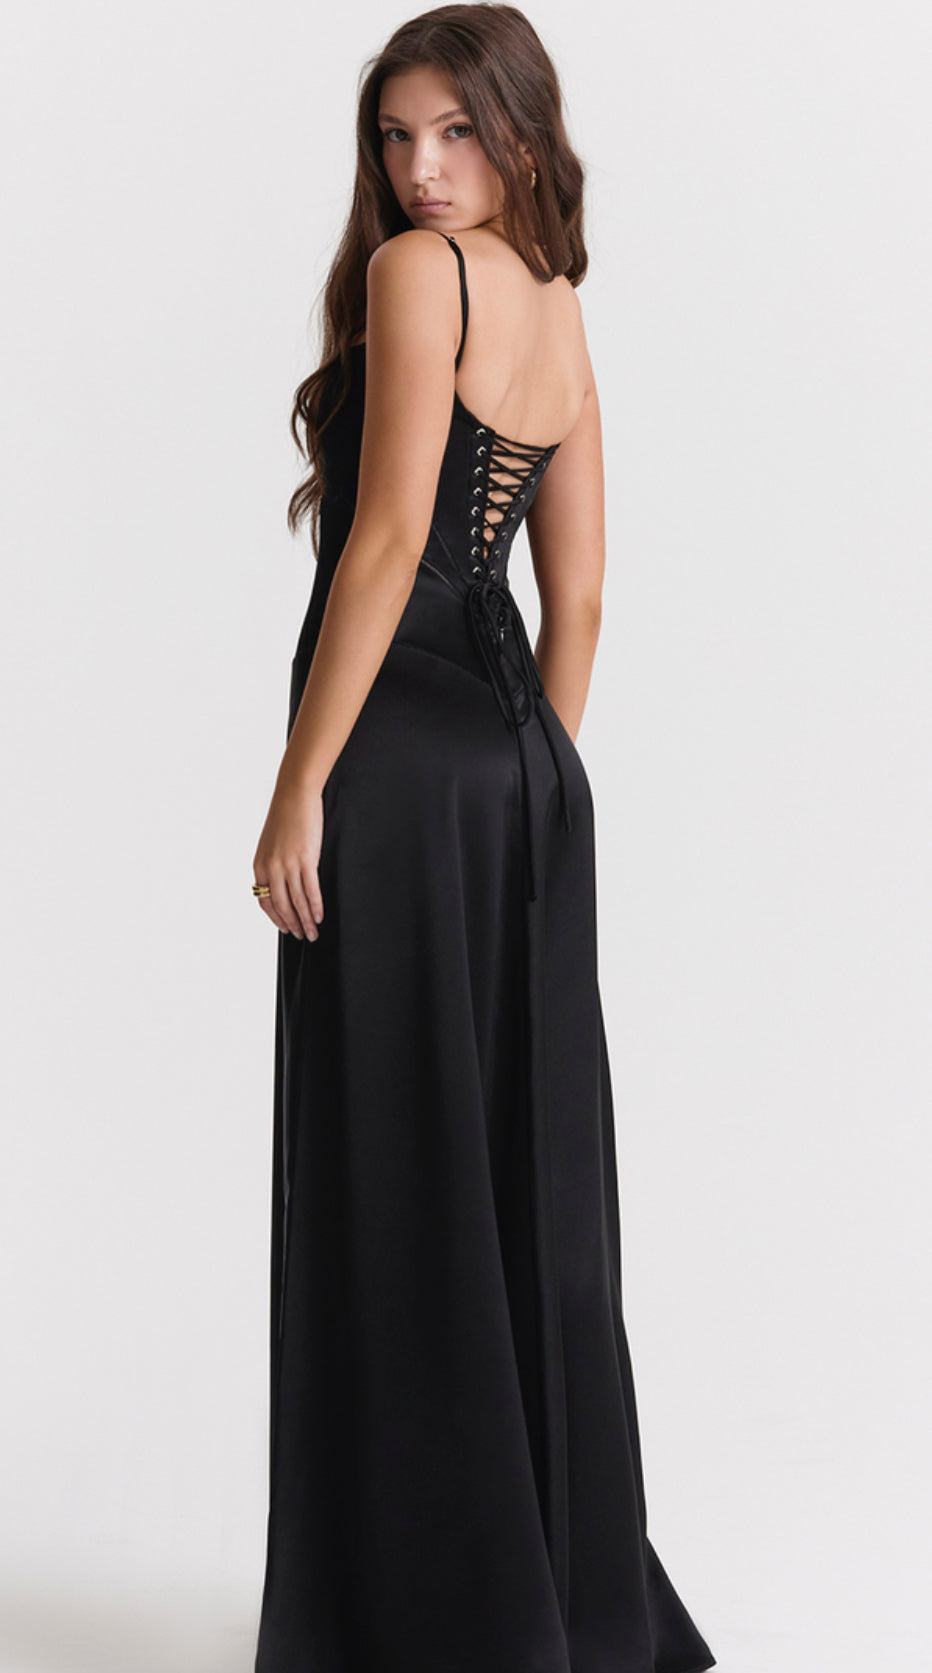 House of CB Annabella Black Dress with lace up back detail. Back and side view with white background